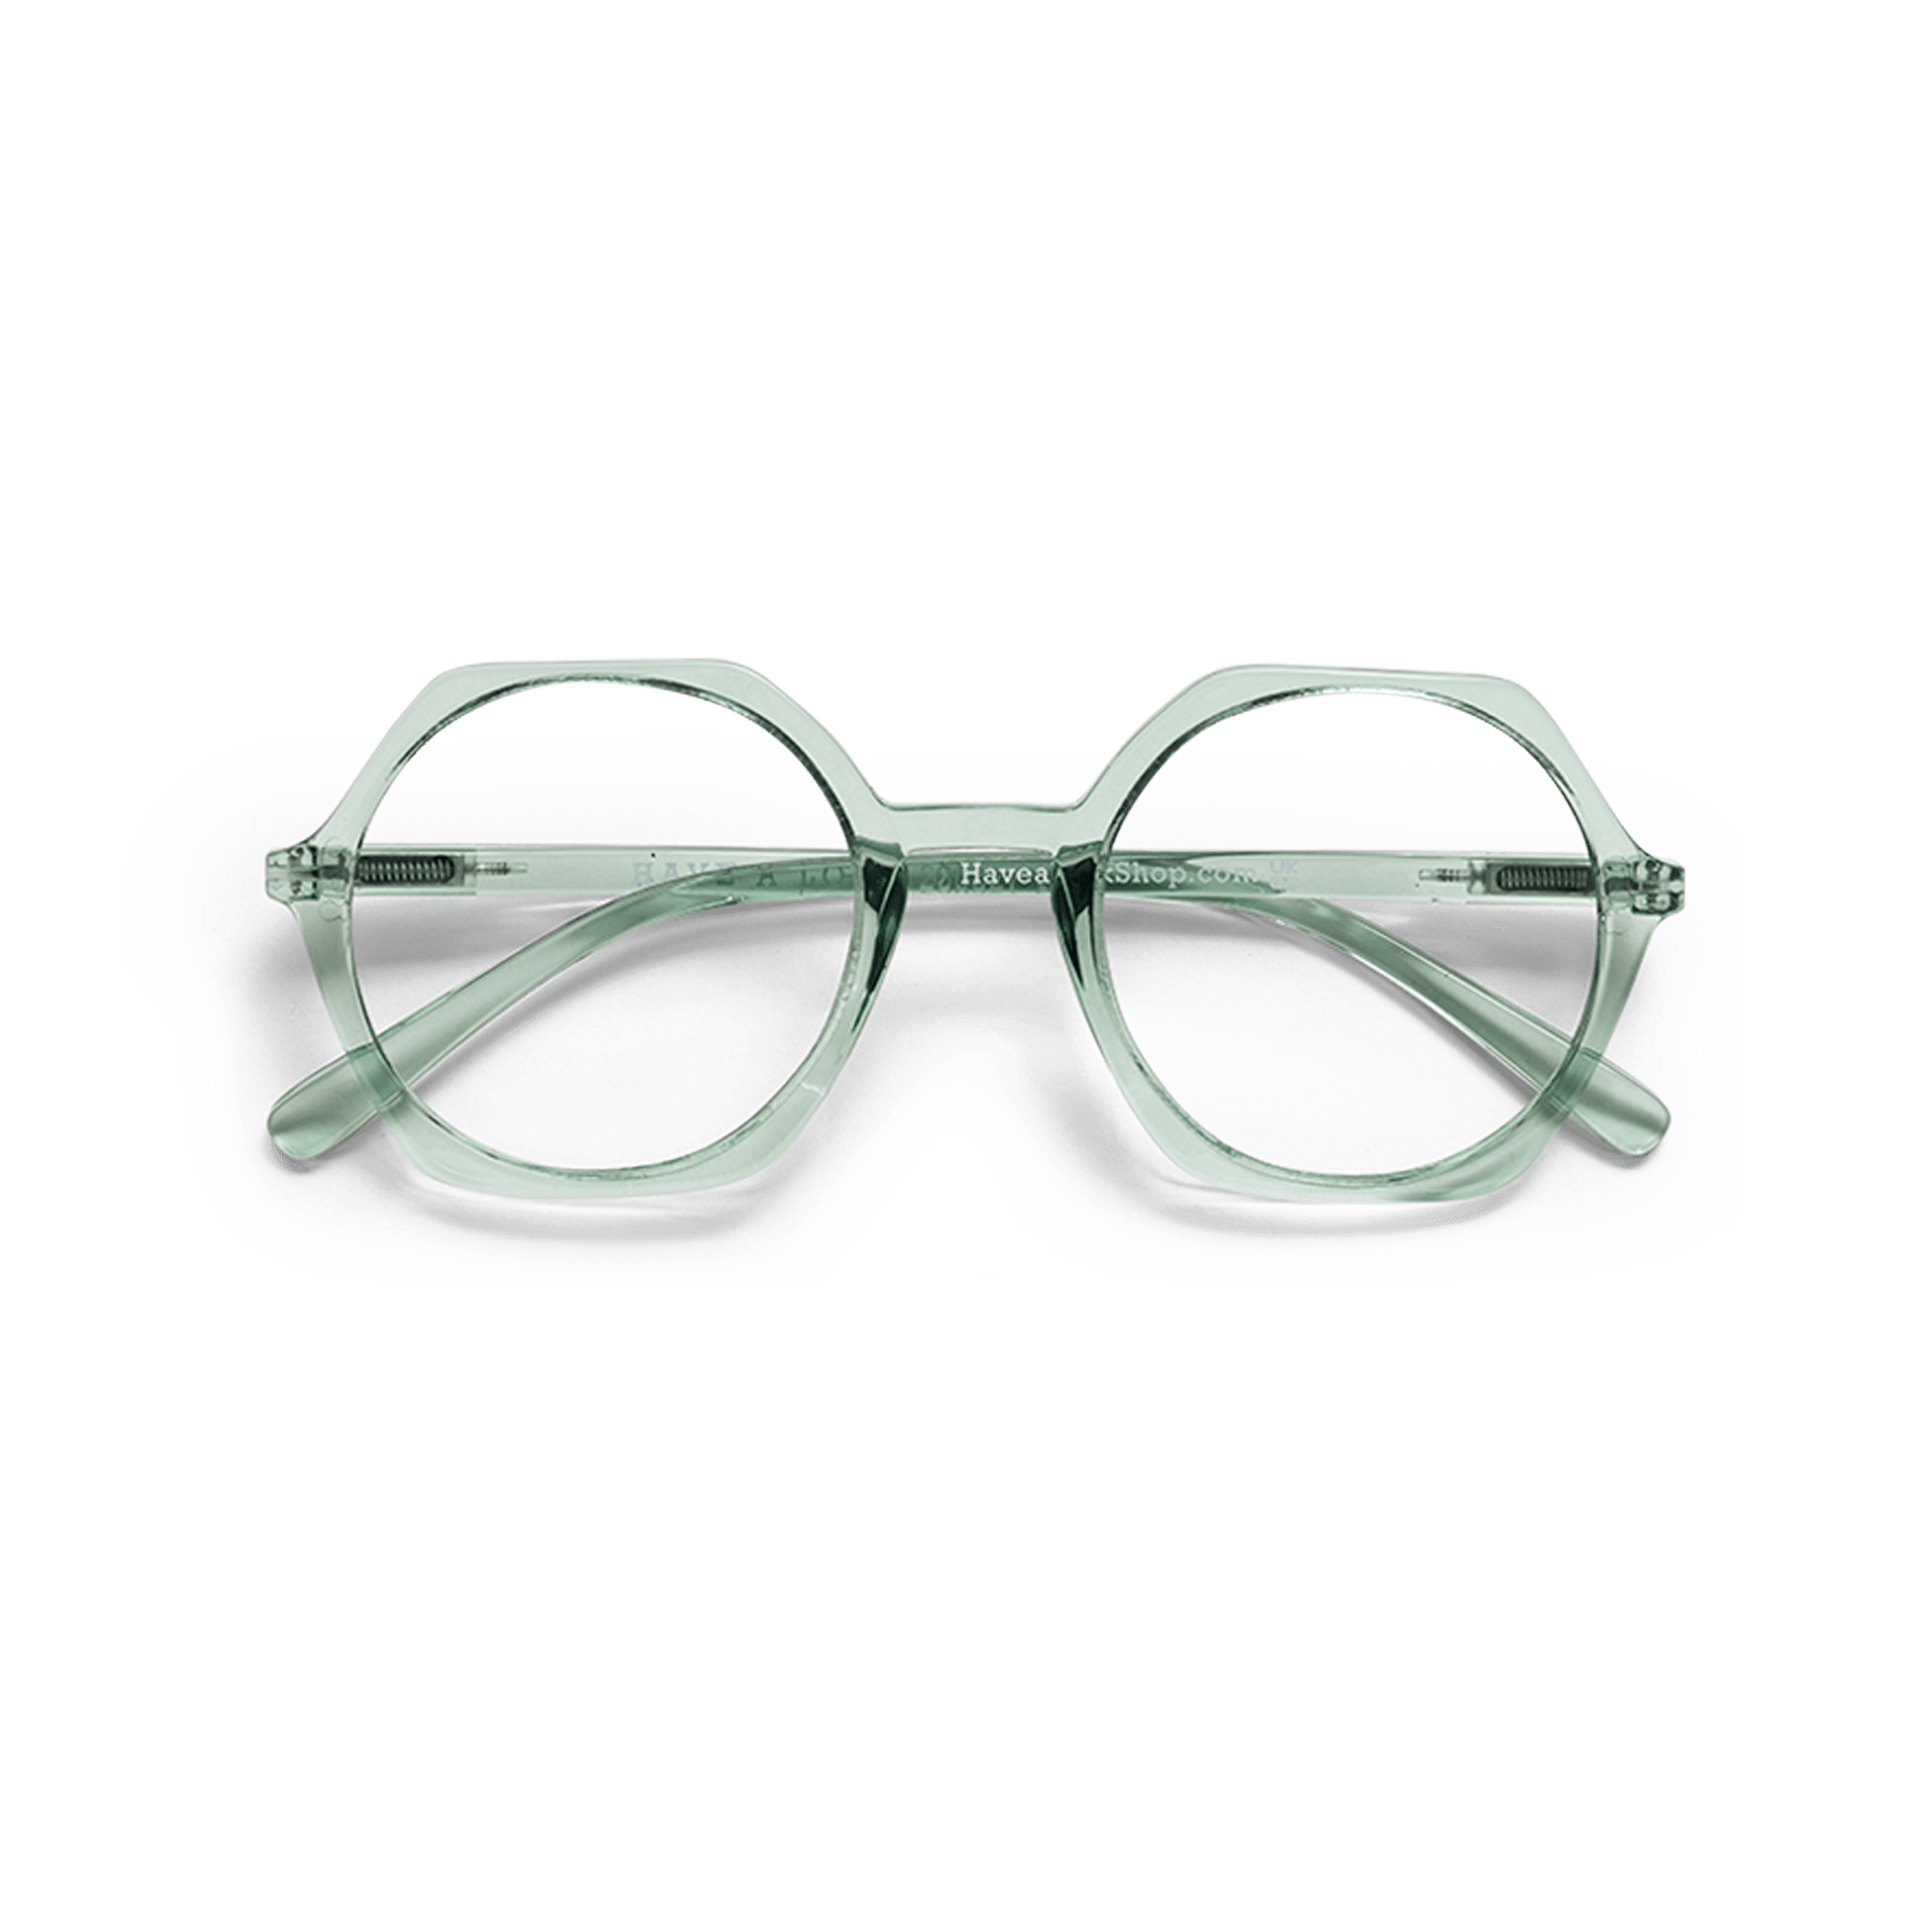 Clear lens glasses Edgy - clear green